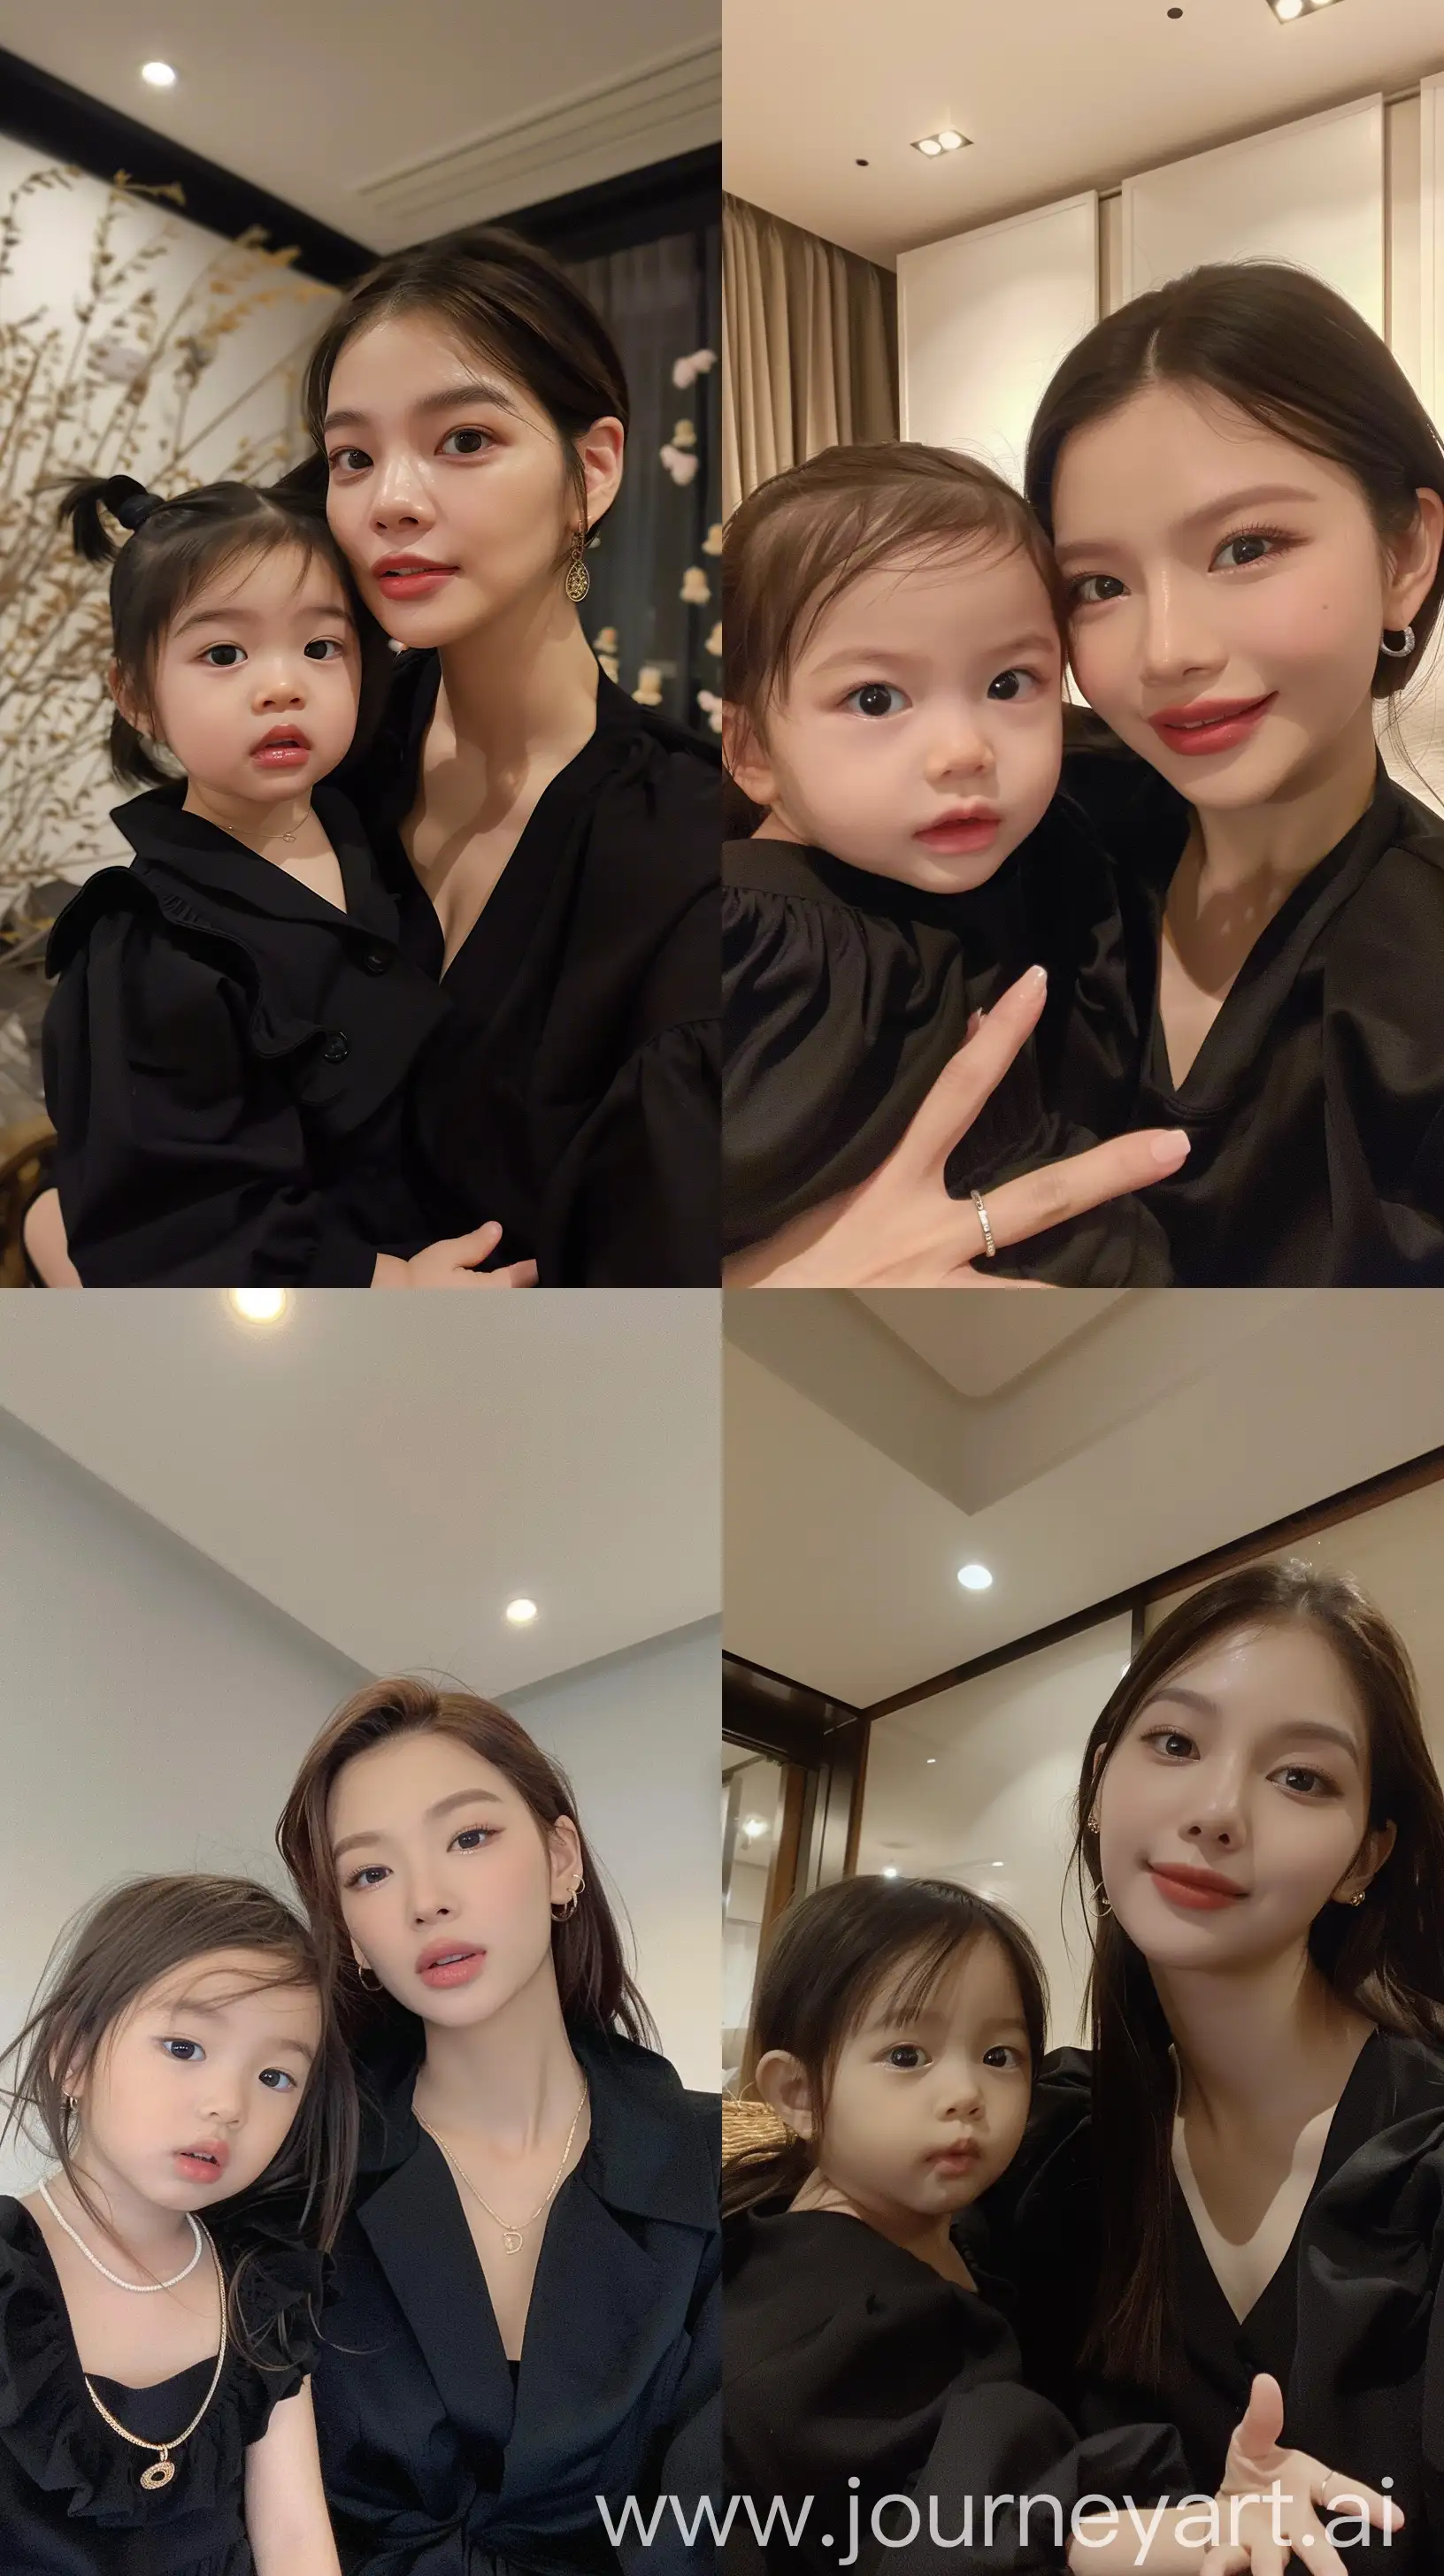 blackpink's jennie selfie with 2 years old  girl, facial feature look a like blackpink's jennie, aestethic selfie, wearing black outfit, night times, aestethic make up,hotly elegant young mom, simple clothes --ar 9:16 